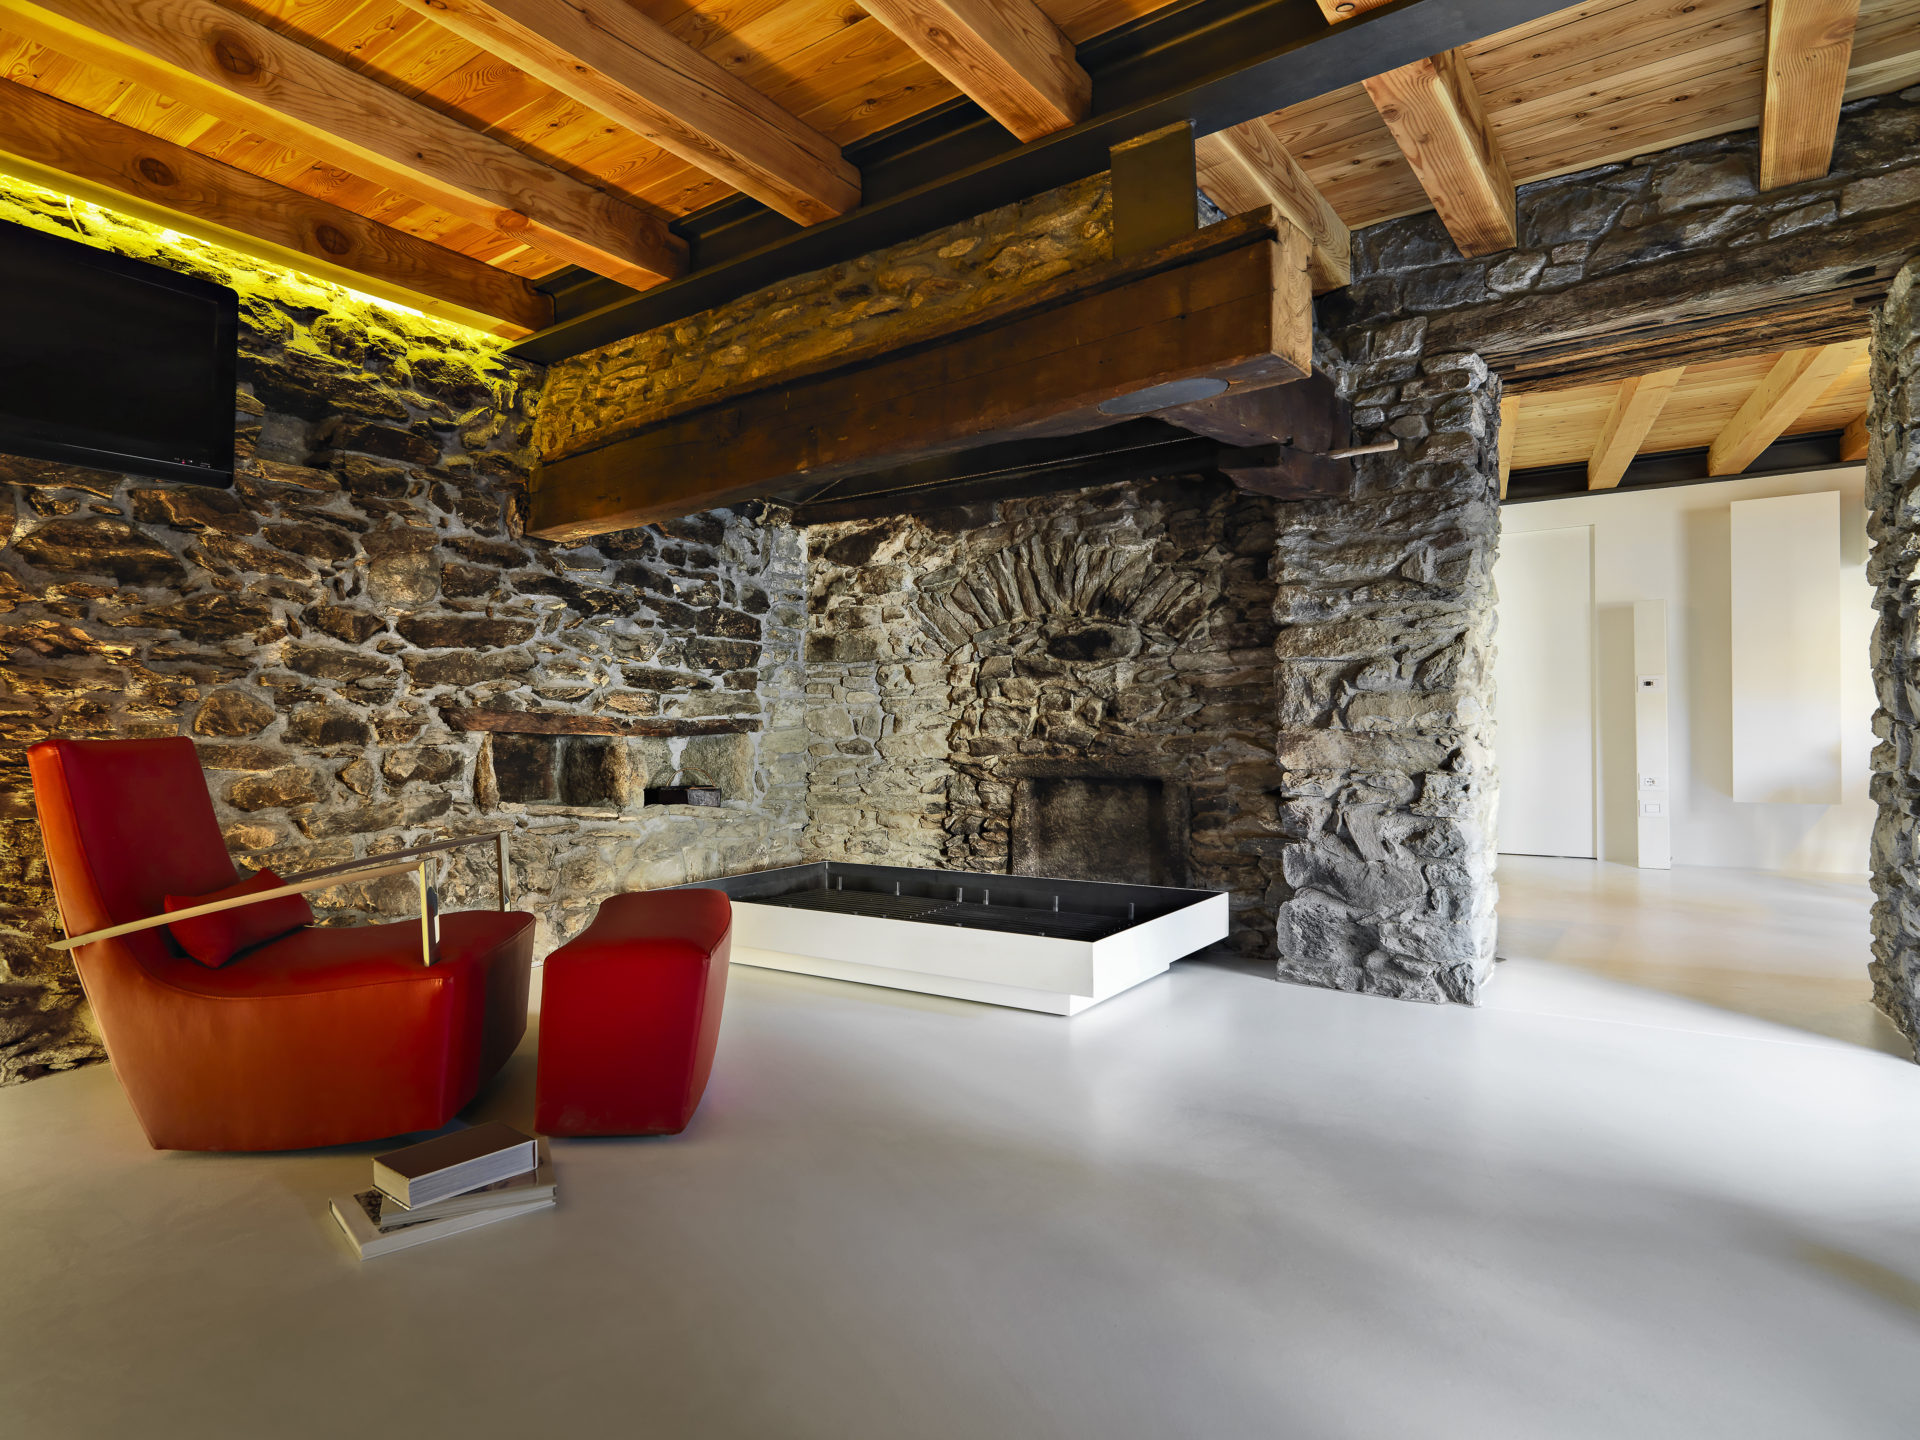 Interior Shots Of A Rustic Living Room With Resin Floor In The Foreground The Leather Armchair And The Rustic Fireplace The Walls Are Made Of Stone